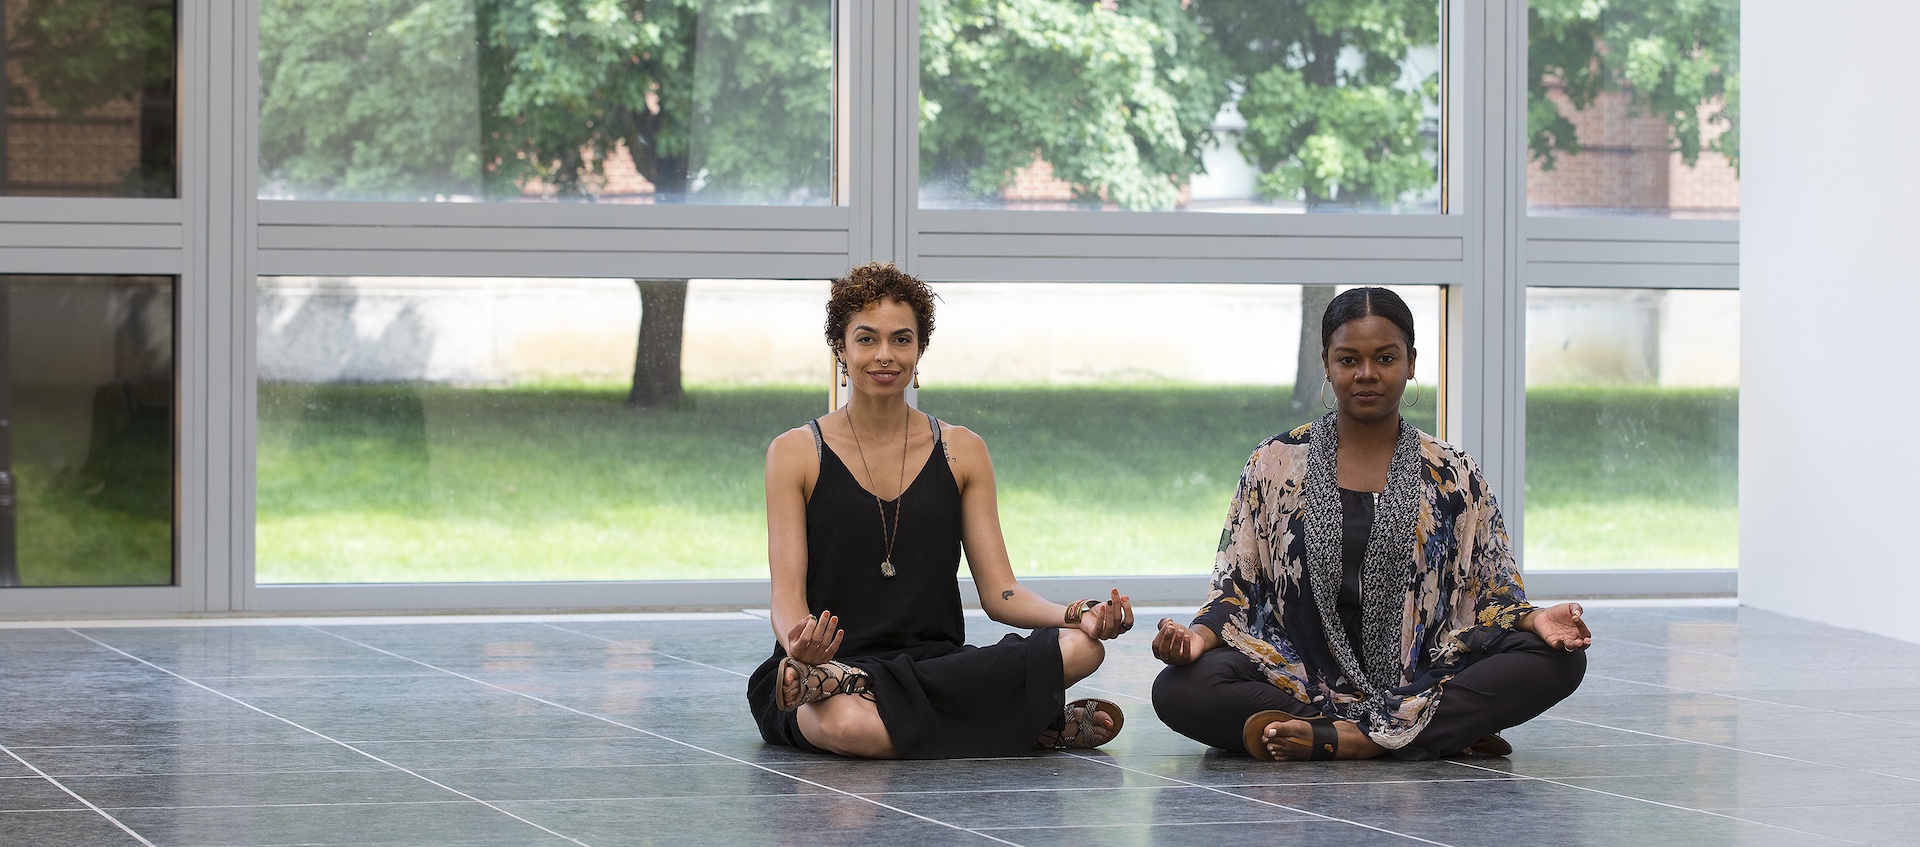 On Pause guided meditation with Replenish Spa Co-op at the Wexner Center for the Arts